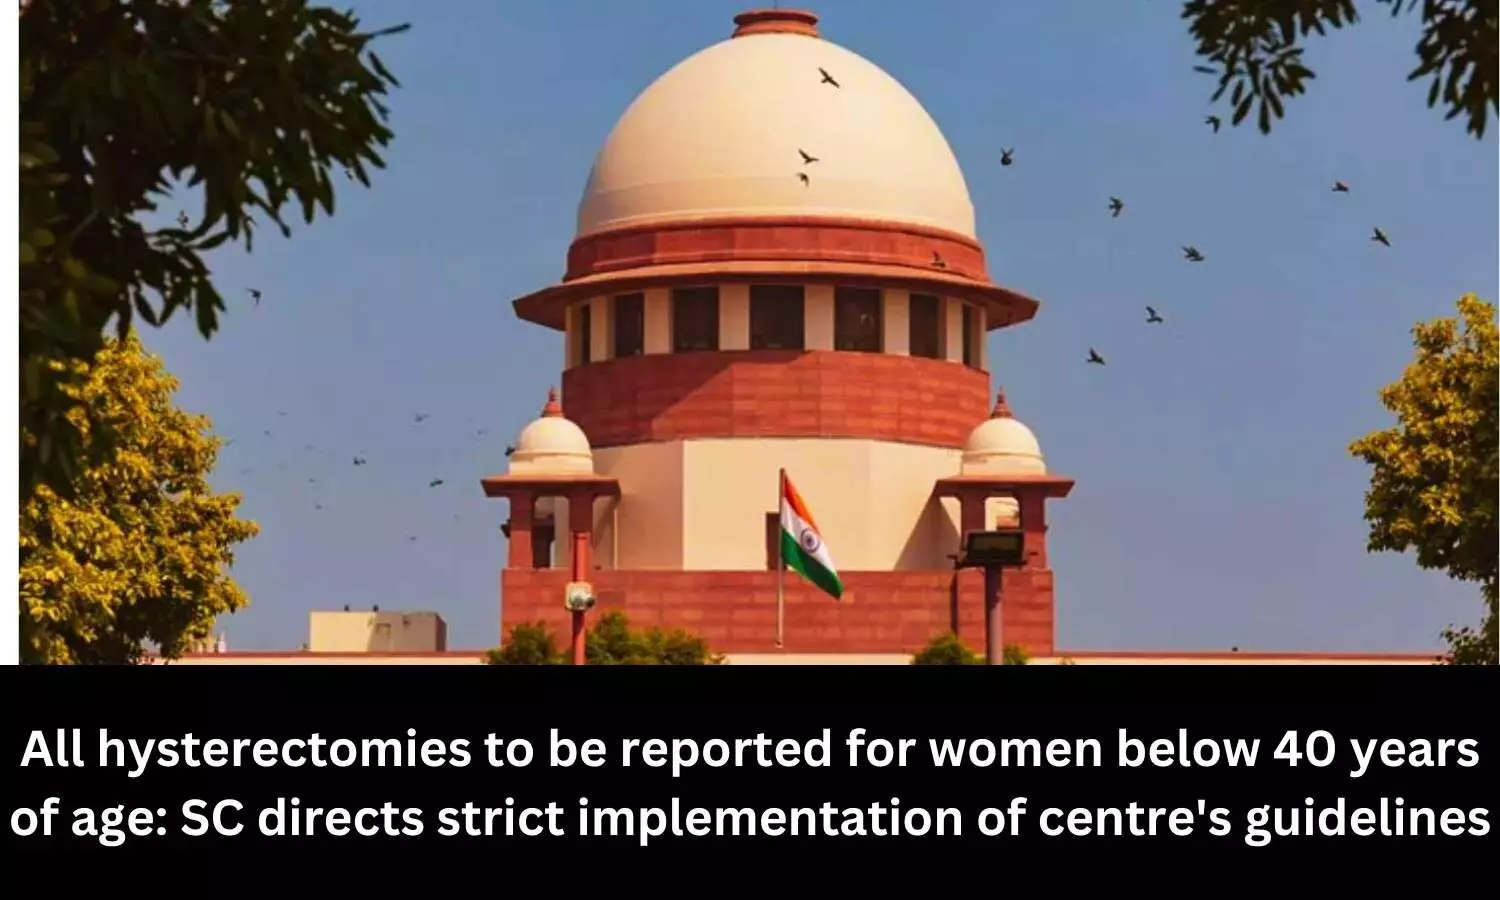 Implement Centres guidelines on unnecessary hysterectomies: SC directs states, UTs